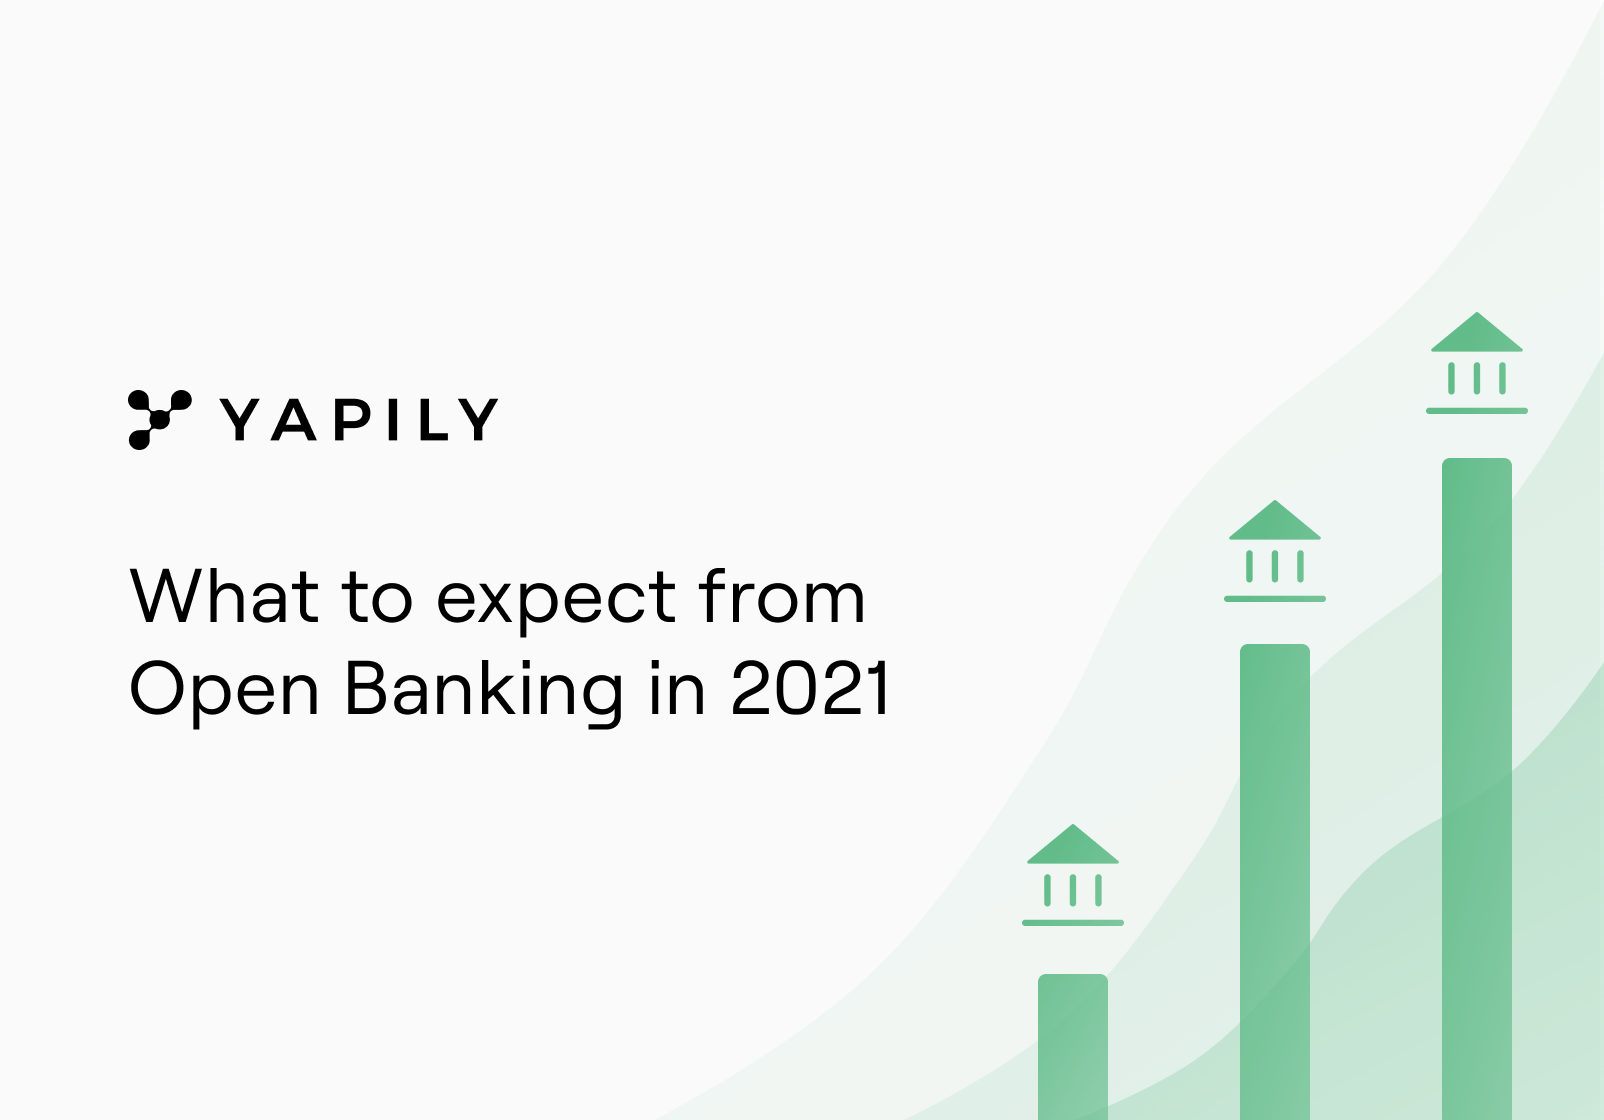 Open Banking is quickly becoming more mainstream and in 2021 adoption is set to increase dramatically. From payments to financial information, Open Banking will change financial services for the better.